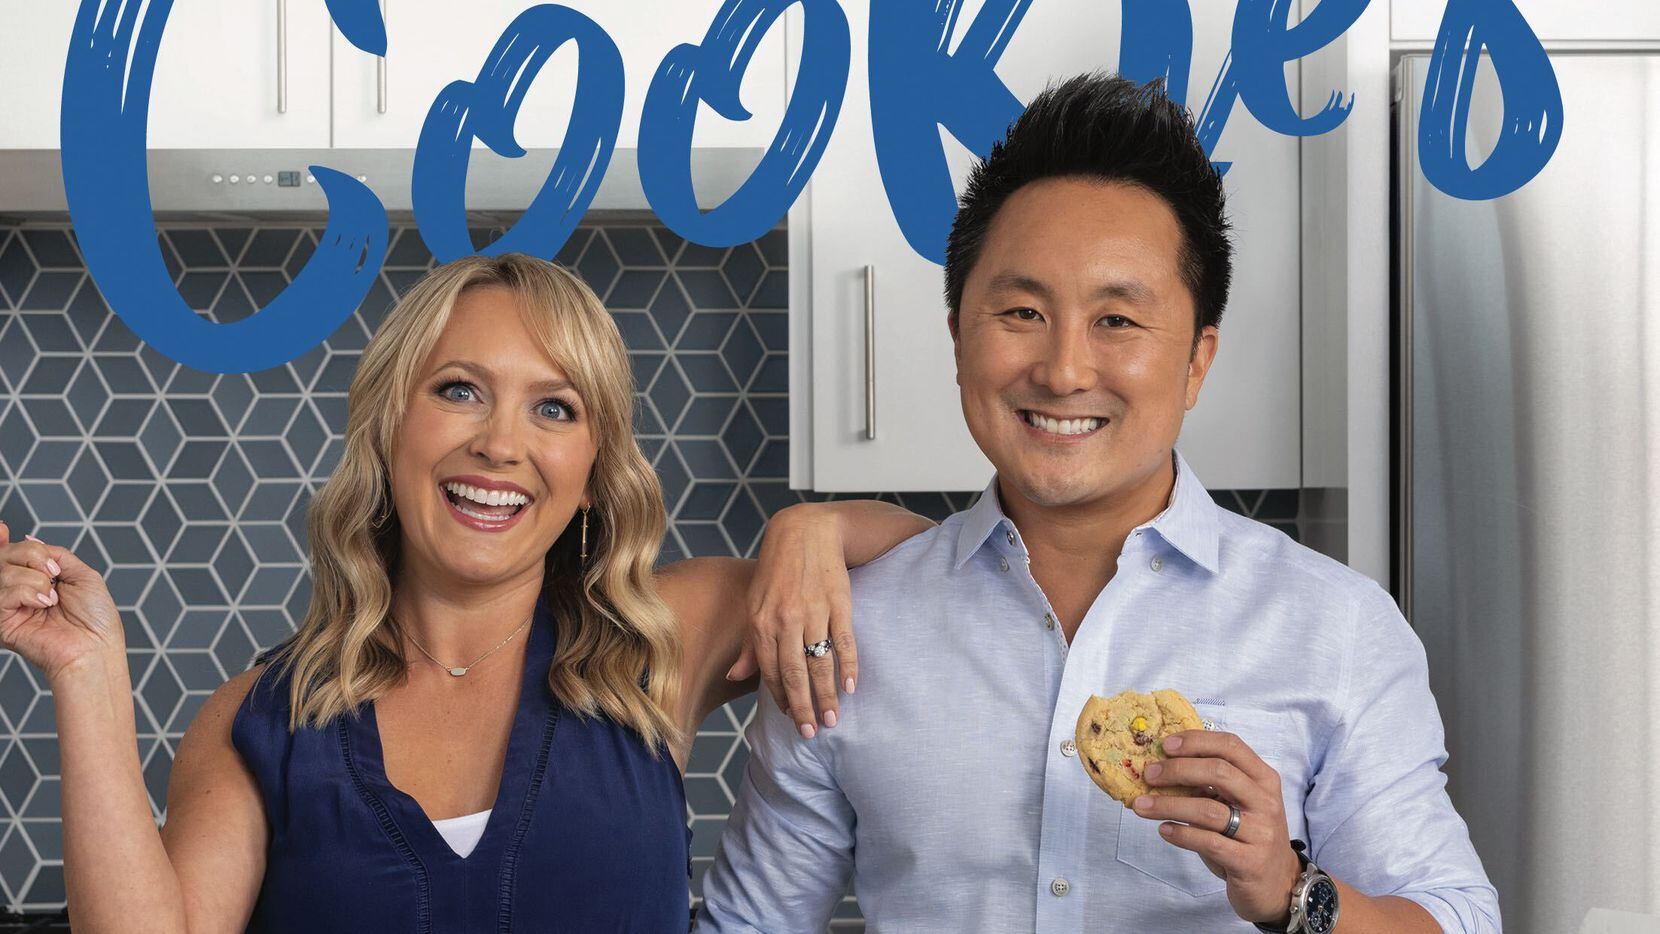 Tiffany and Leon Chen, founders of Tiff's Treats, have just released their first book.